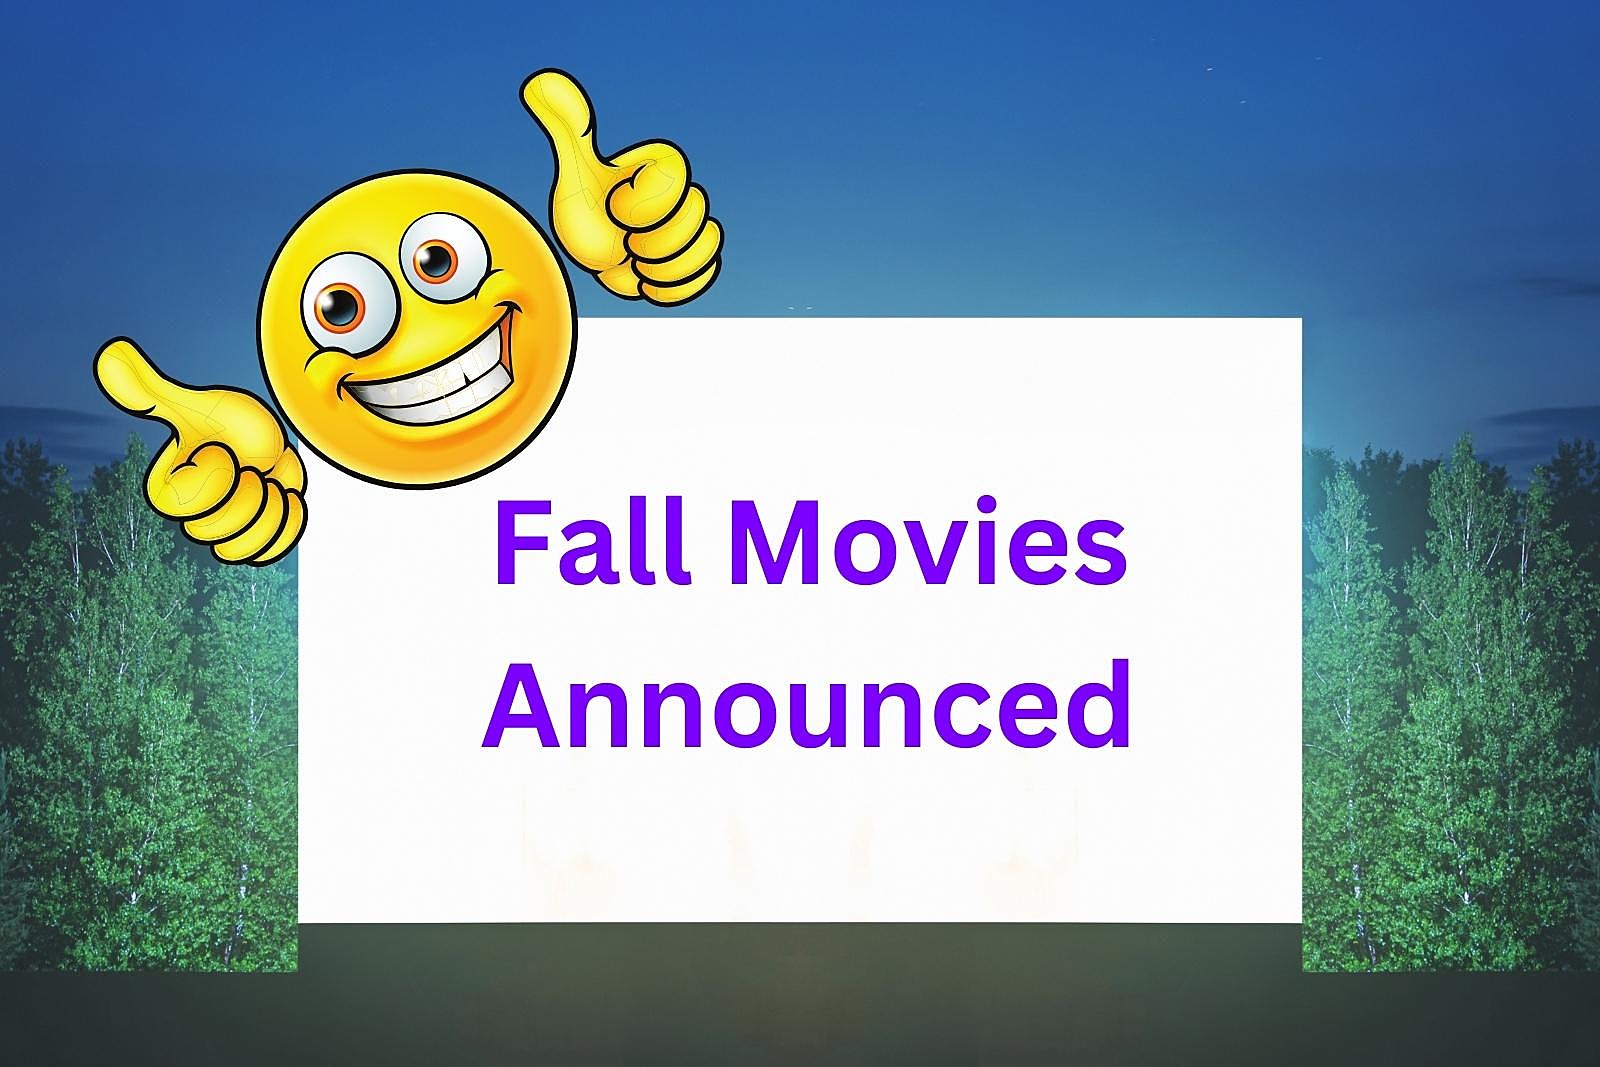 Enjoy Free Movies in The Park at Spring Lake Park This Fall picture pic